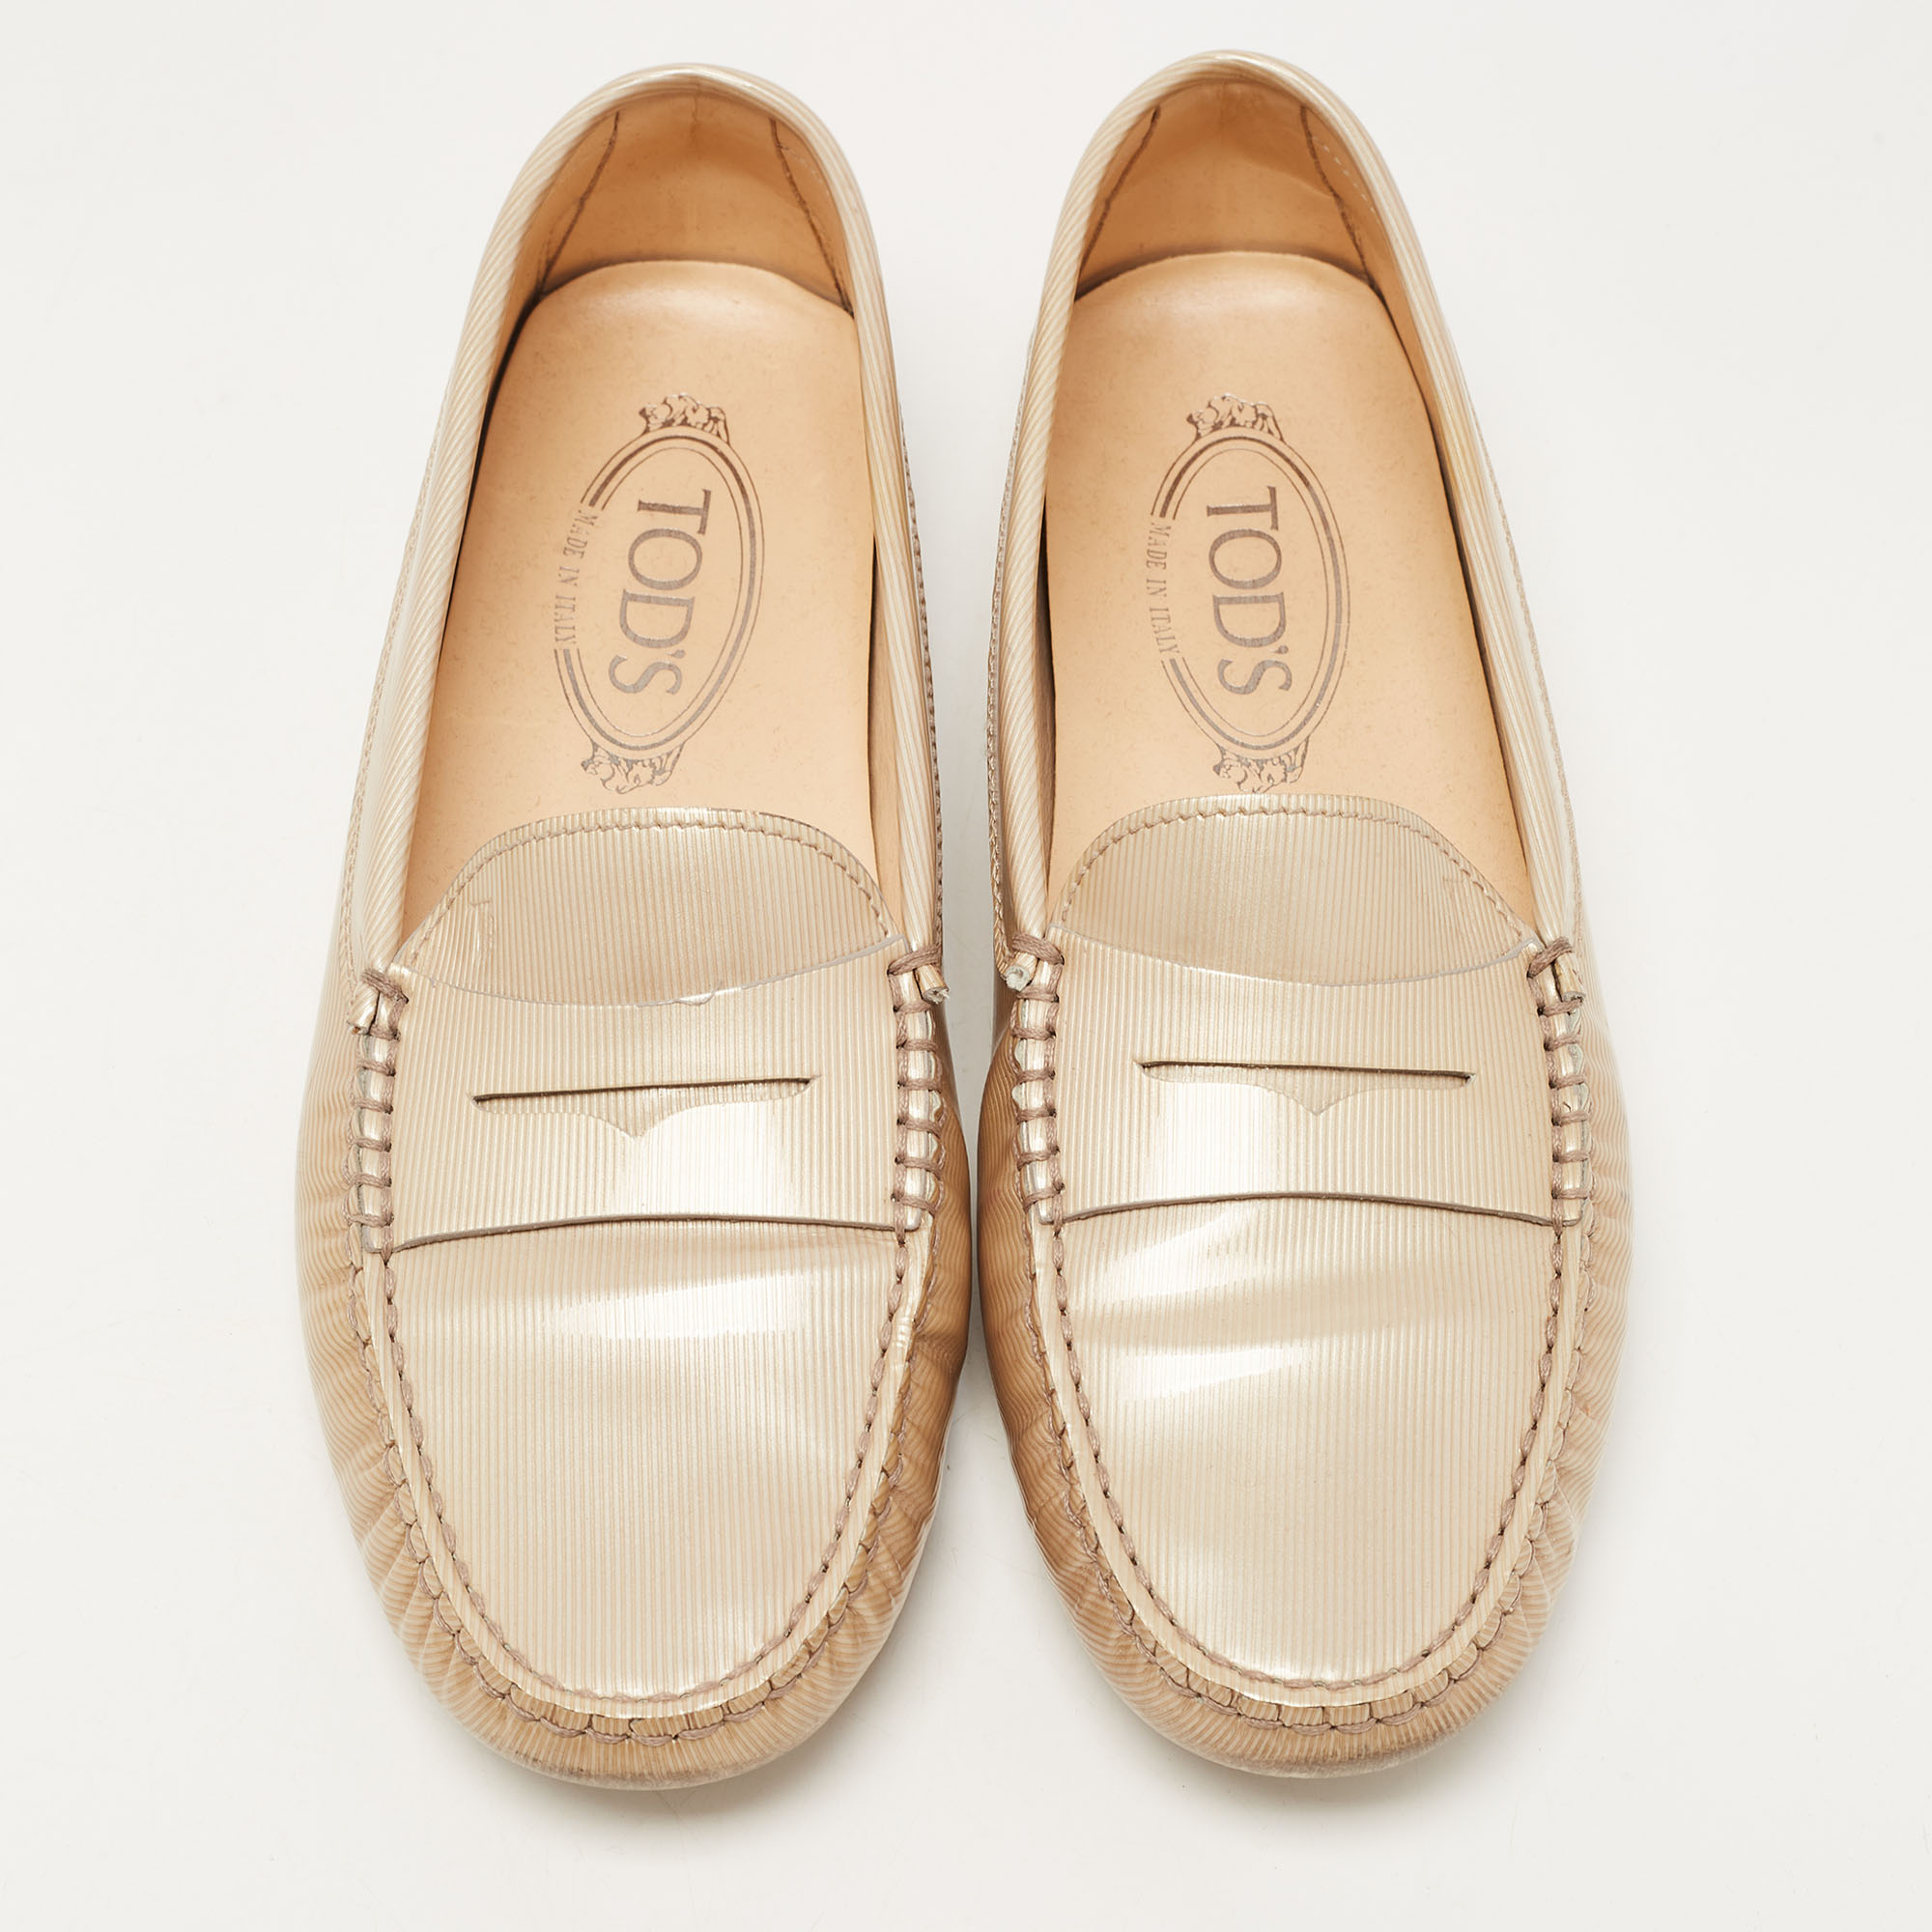 Tod's Beige Textured Patent Leather Penny Loafers Size 39